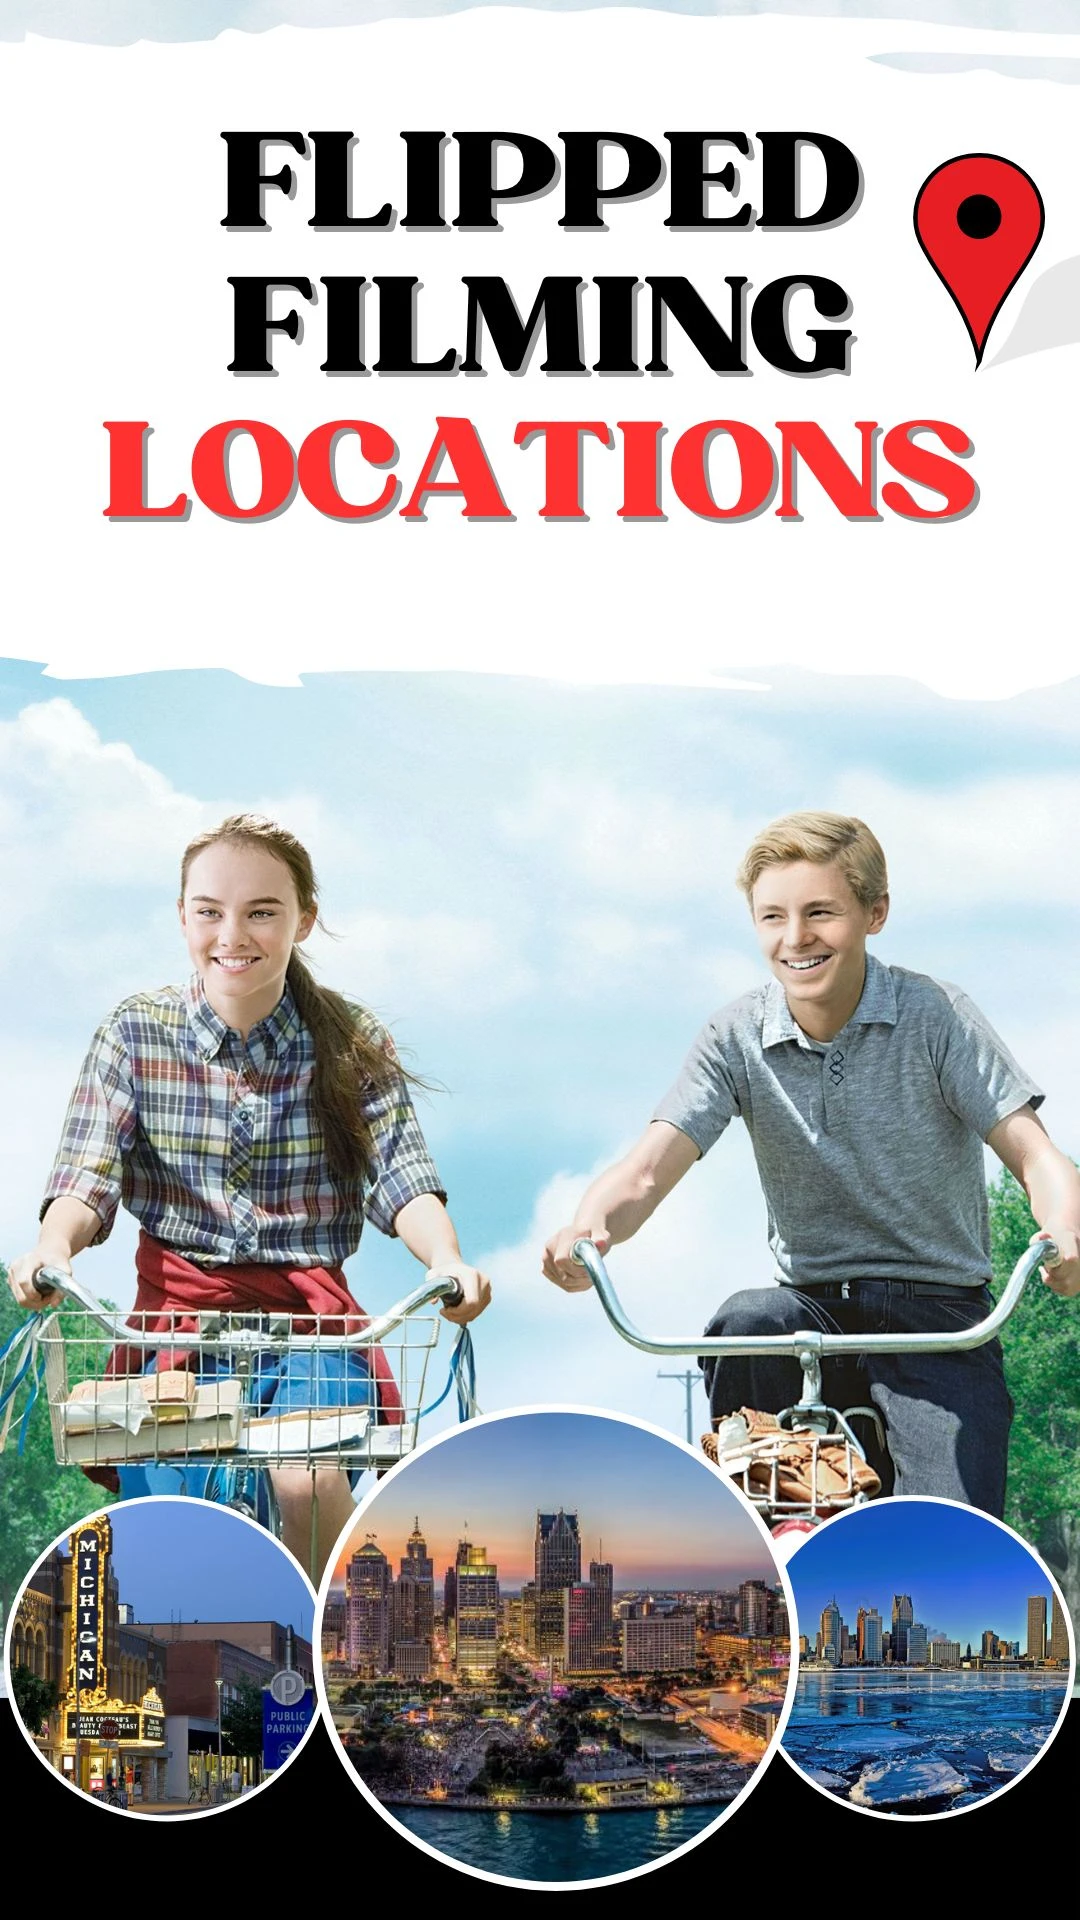 Flipped Filming Locations